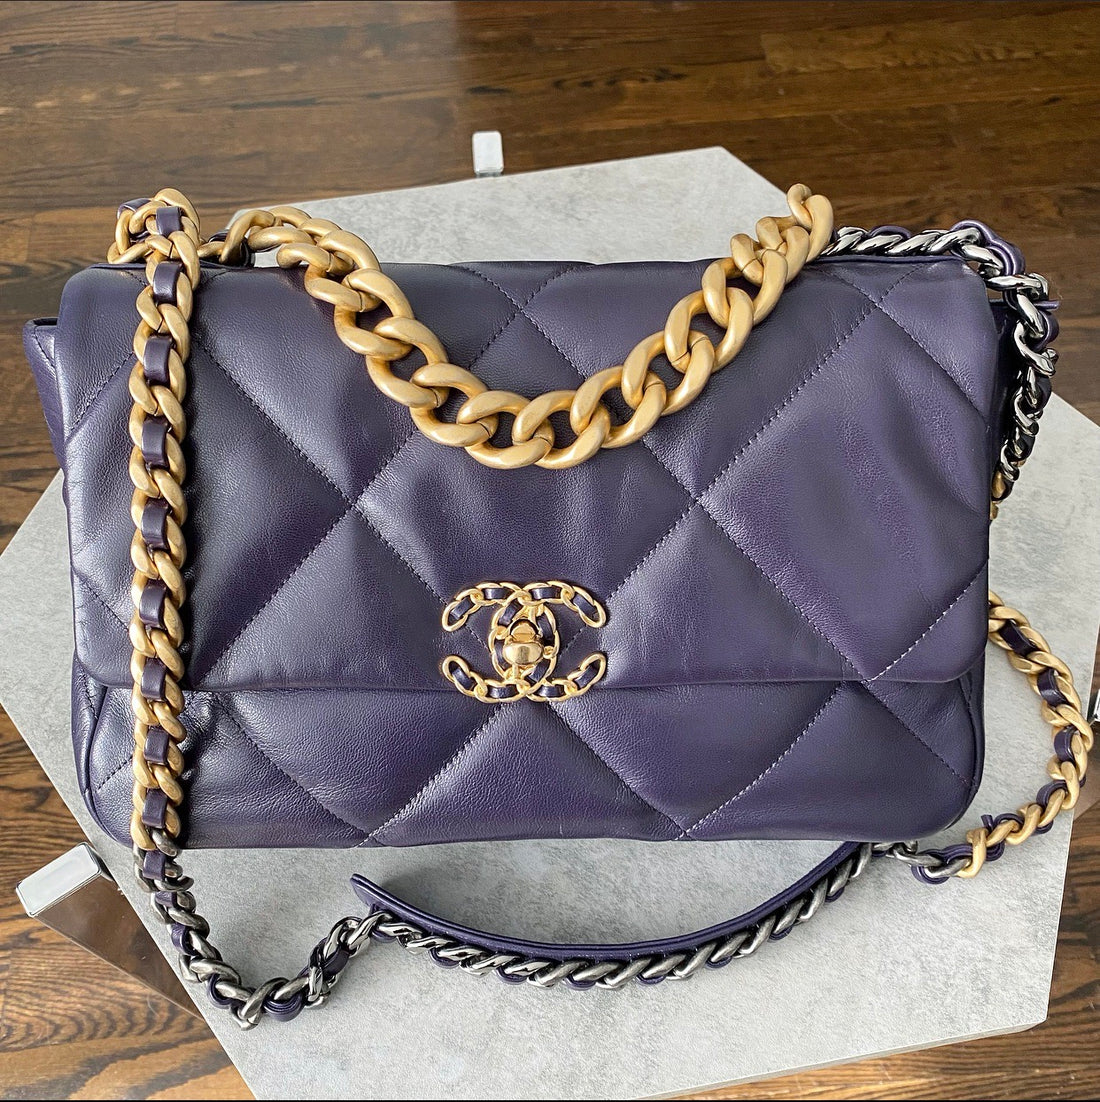 Chanel 19 Tie and Dye Flap Blue/Purple in Calfskin Leather with